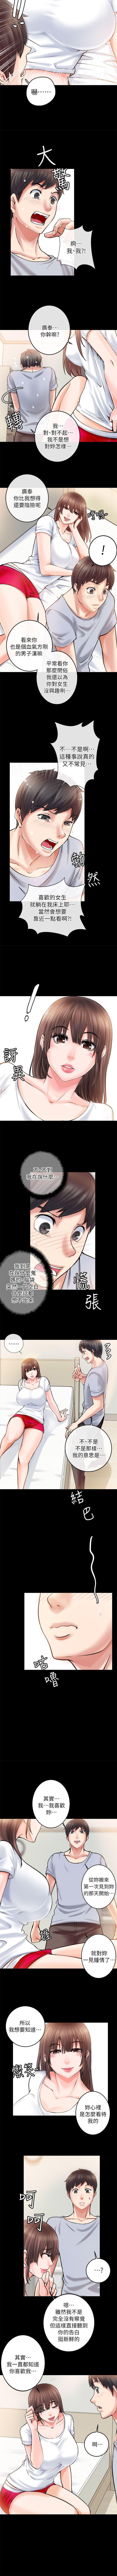 Innocent 觸不到的她 1-39 Mms - Page 10